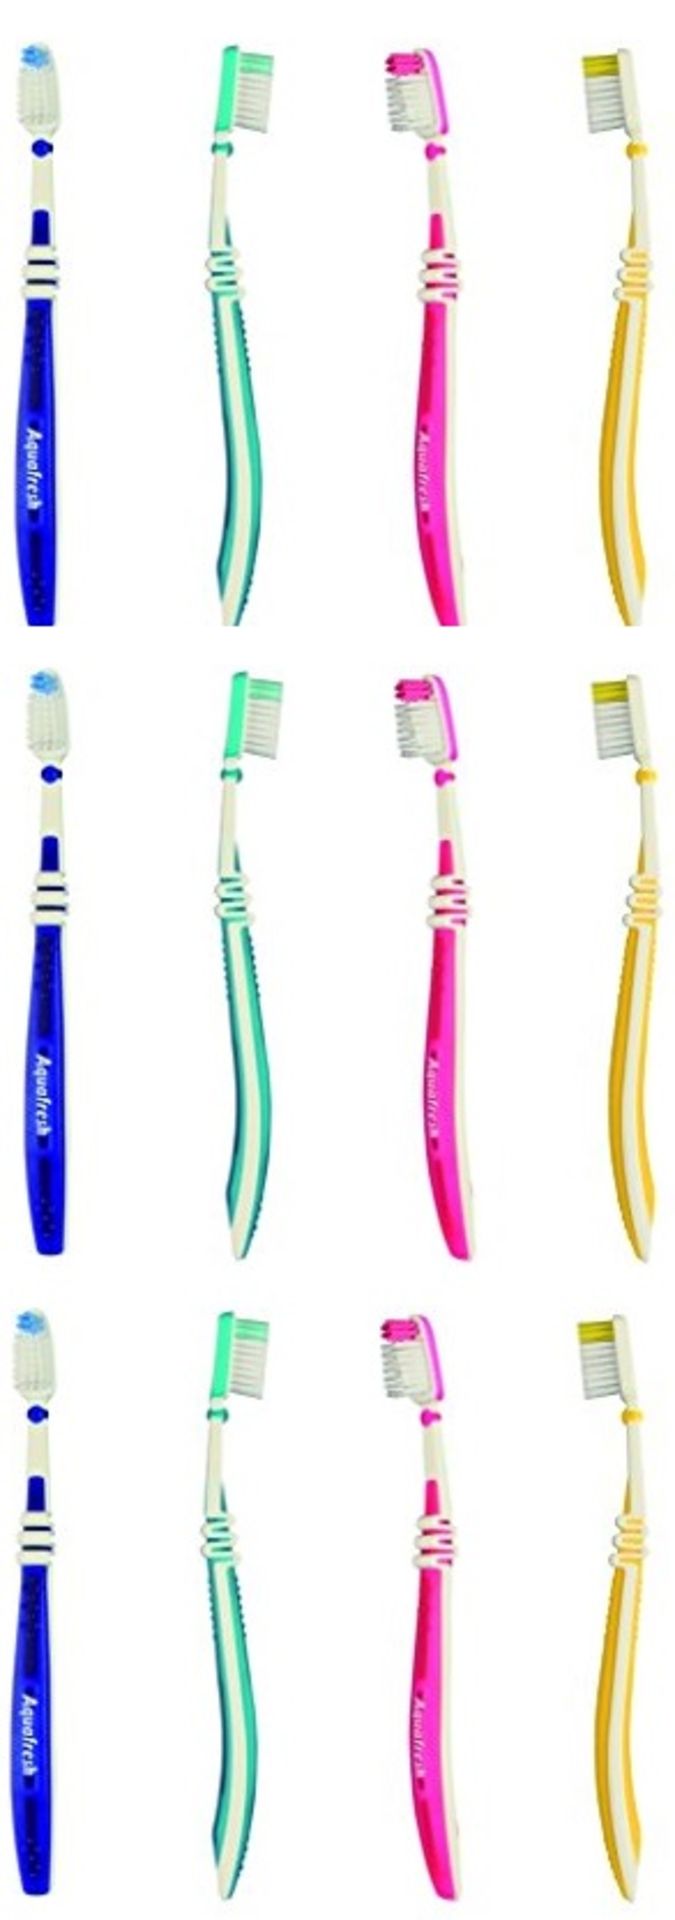 V *TRADE QTY* Brand New 12 x Aquafresh Activate Triple Protection Toothbrush Firm Clean Amazon Price